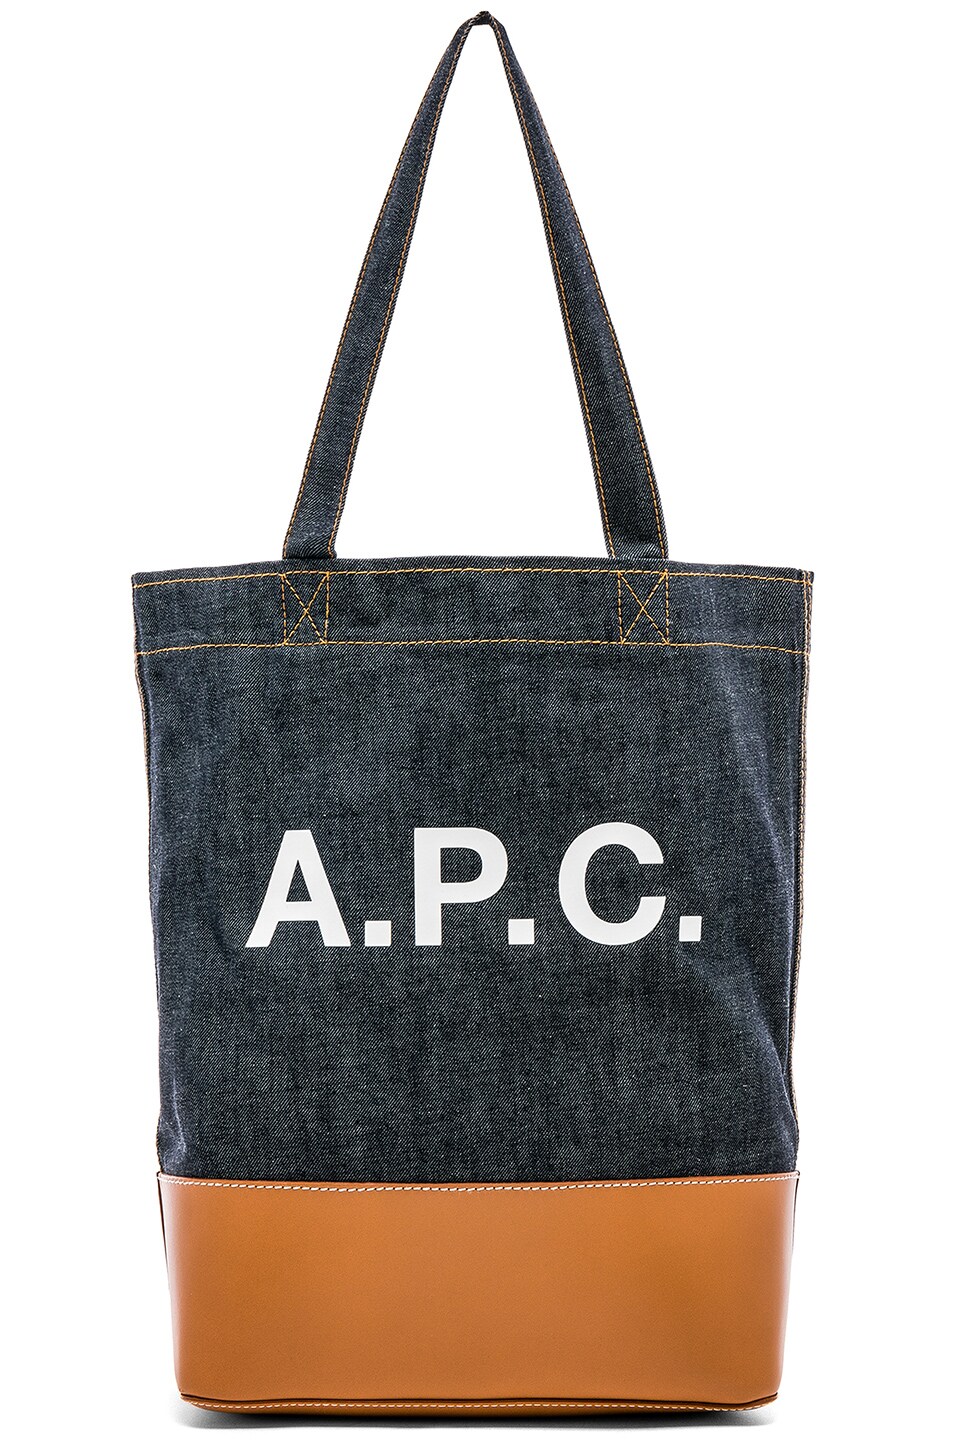 Image 1 of A.P.C. Axel Bag in Caramel